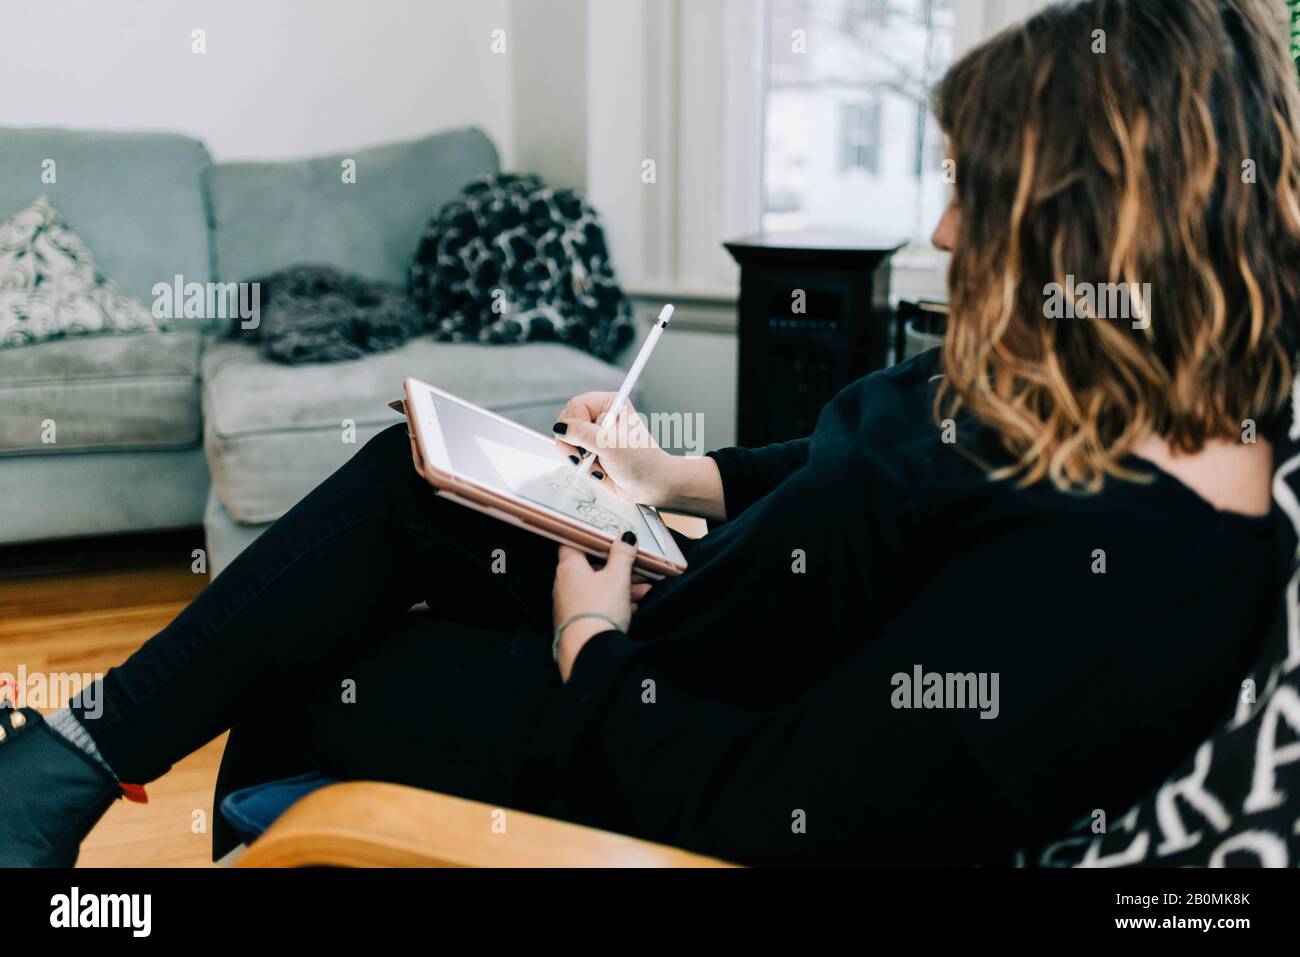 Stock photo of an artist sketching with her tablet. Stock Photo